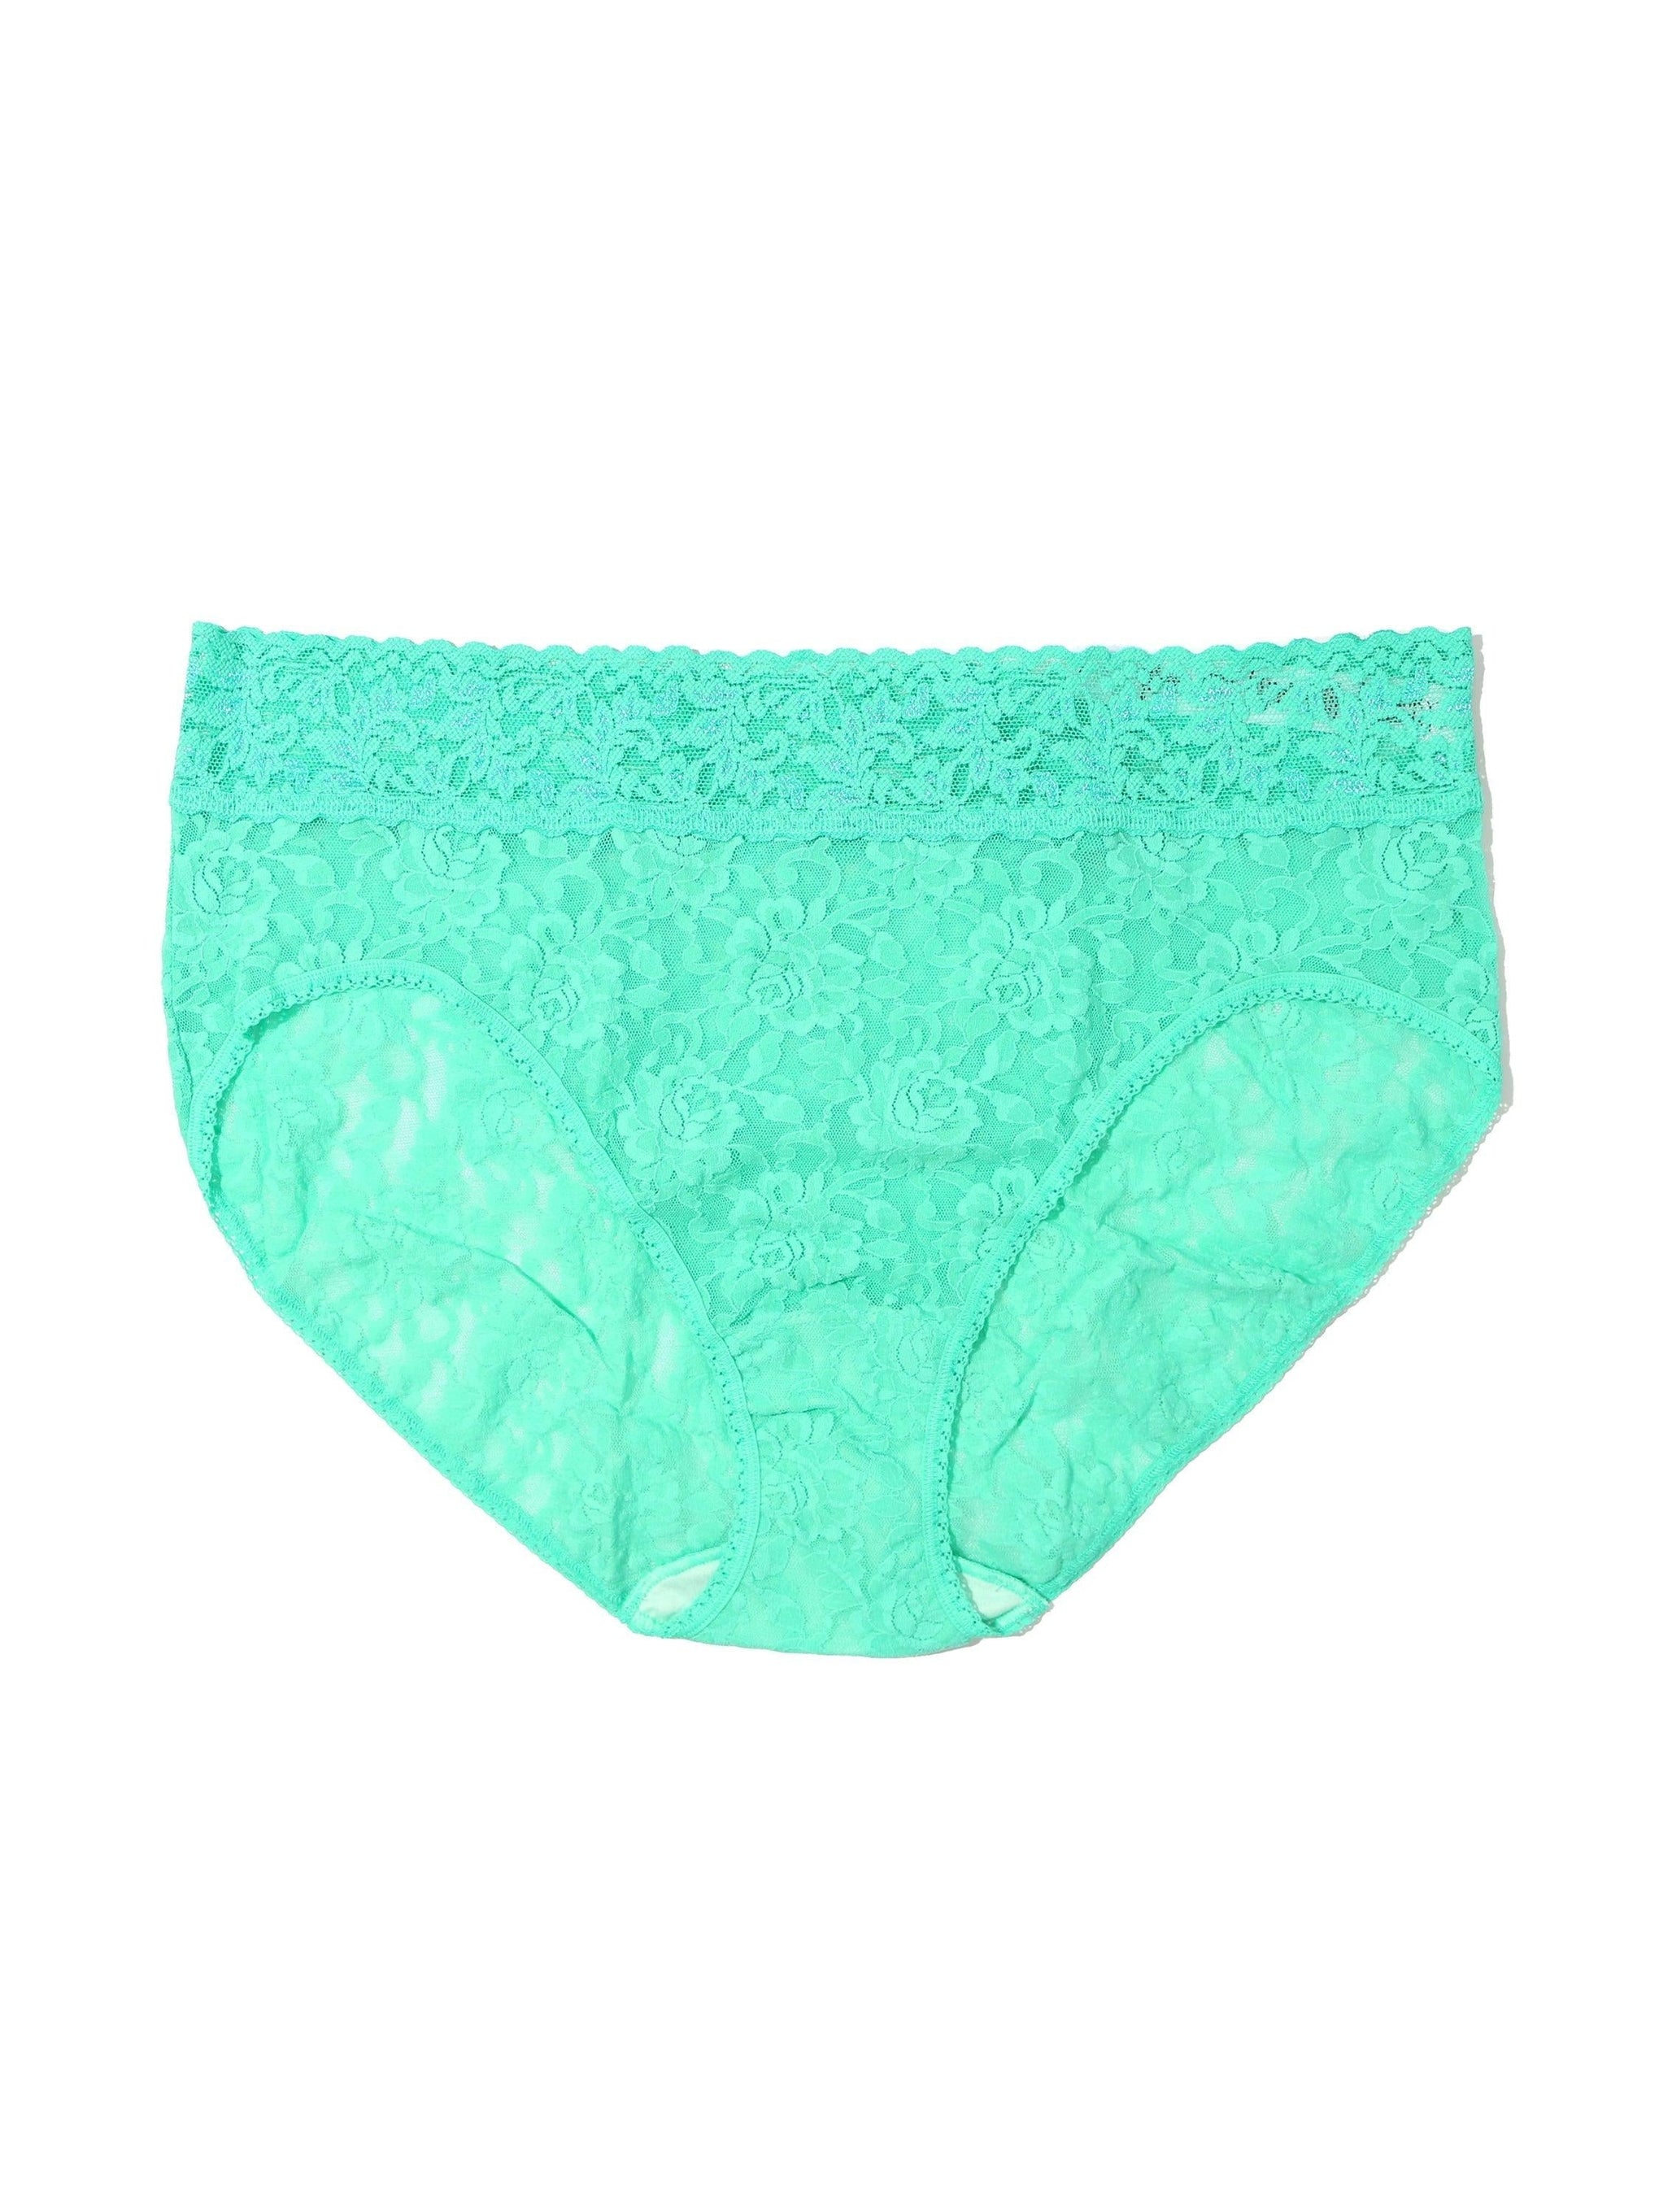 Plus Size Signature Lace French Brief Agave Green